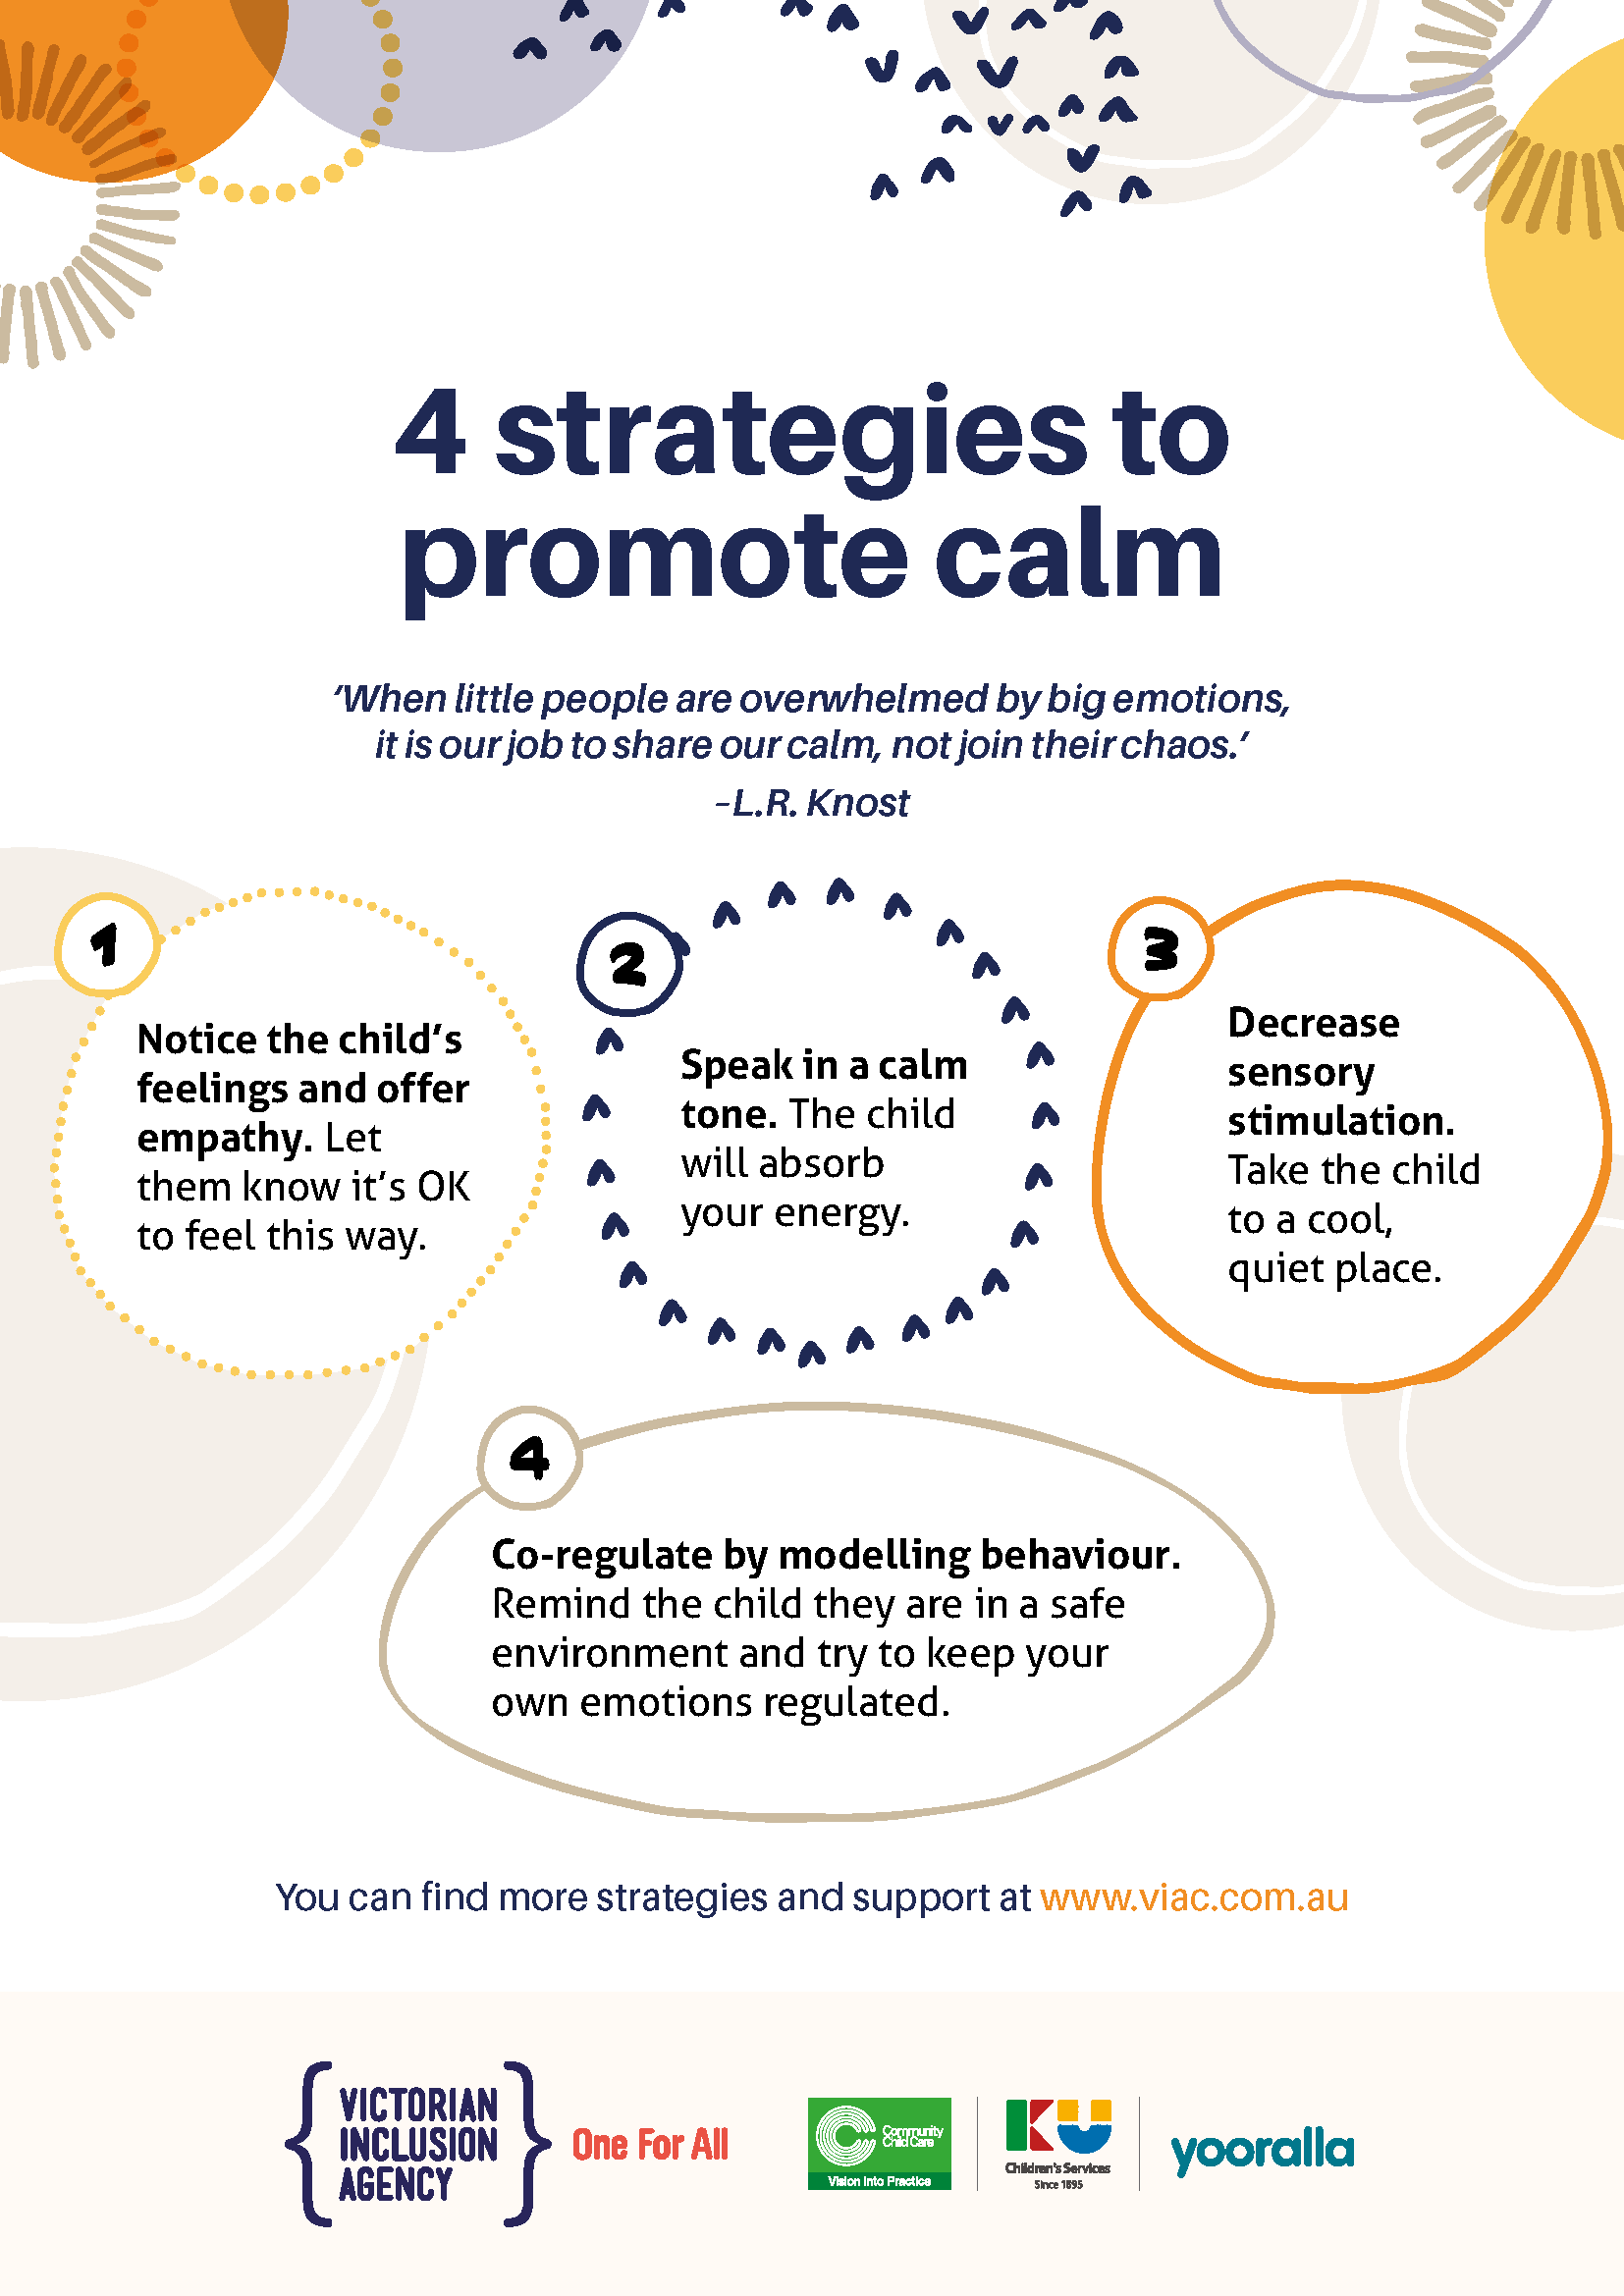 4 strategies to promote calm